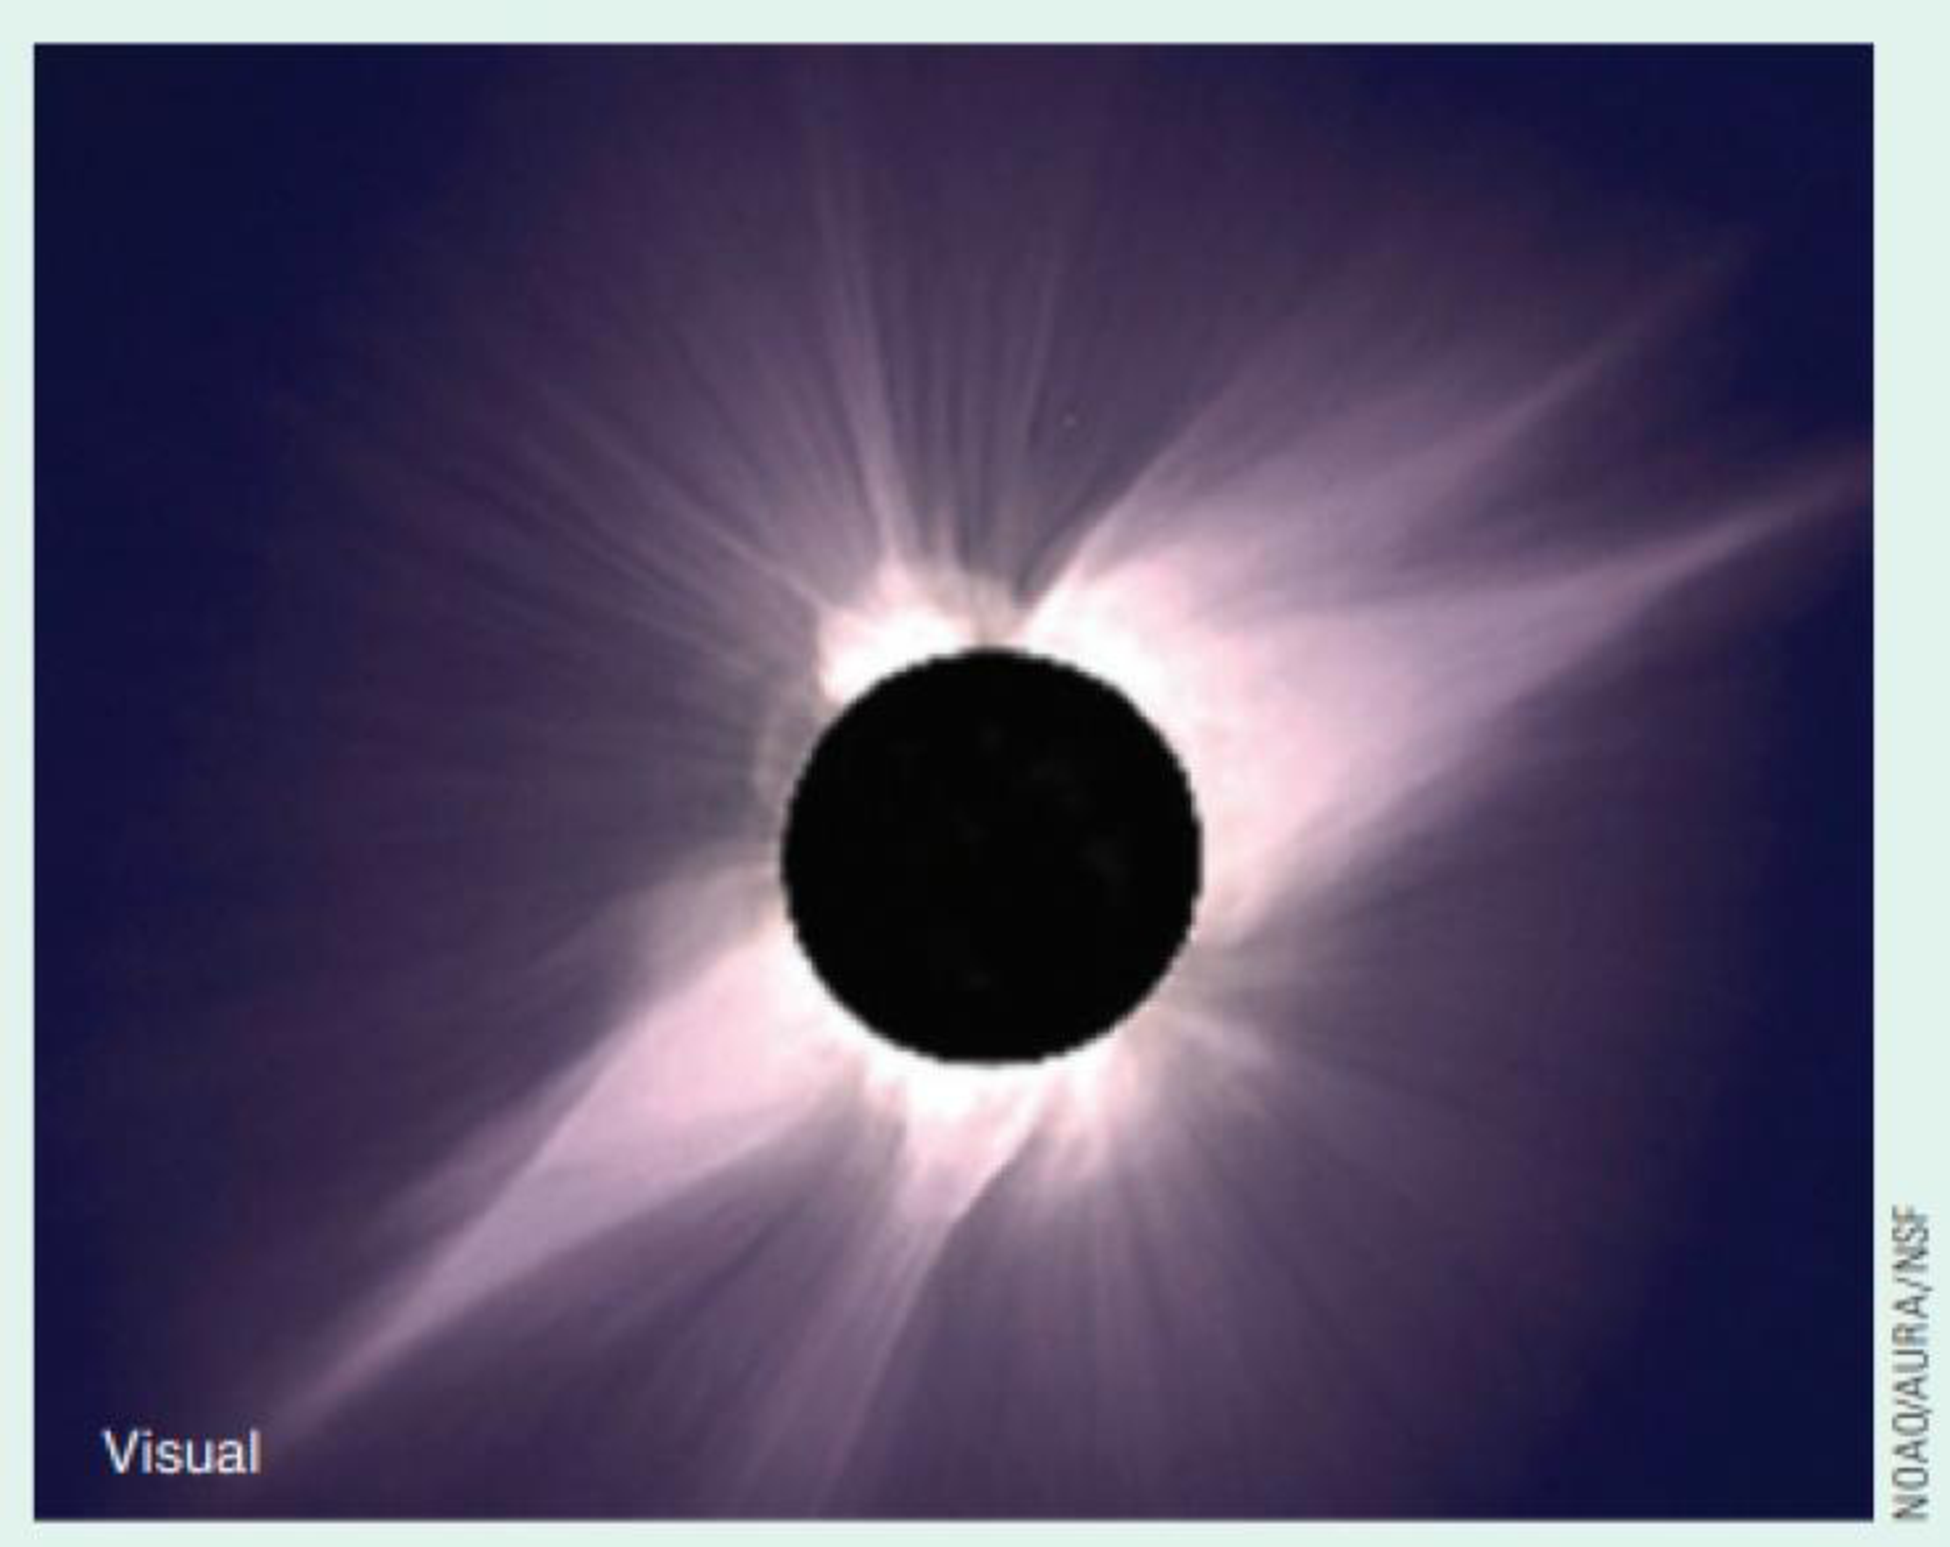 Chapter 8, Problem 1LTL, Whenever there is a total solar eclipse, you can see something like the image shown here. Explain 